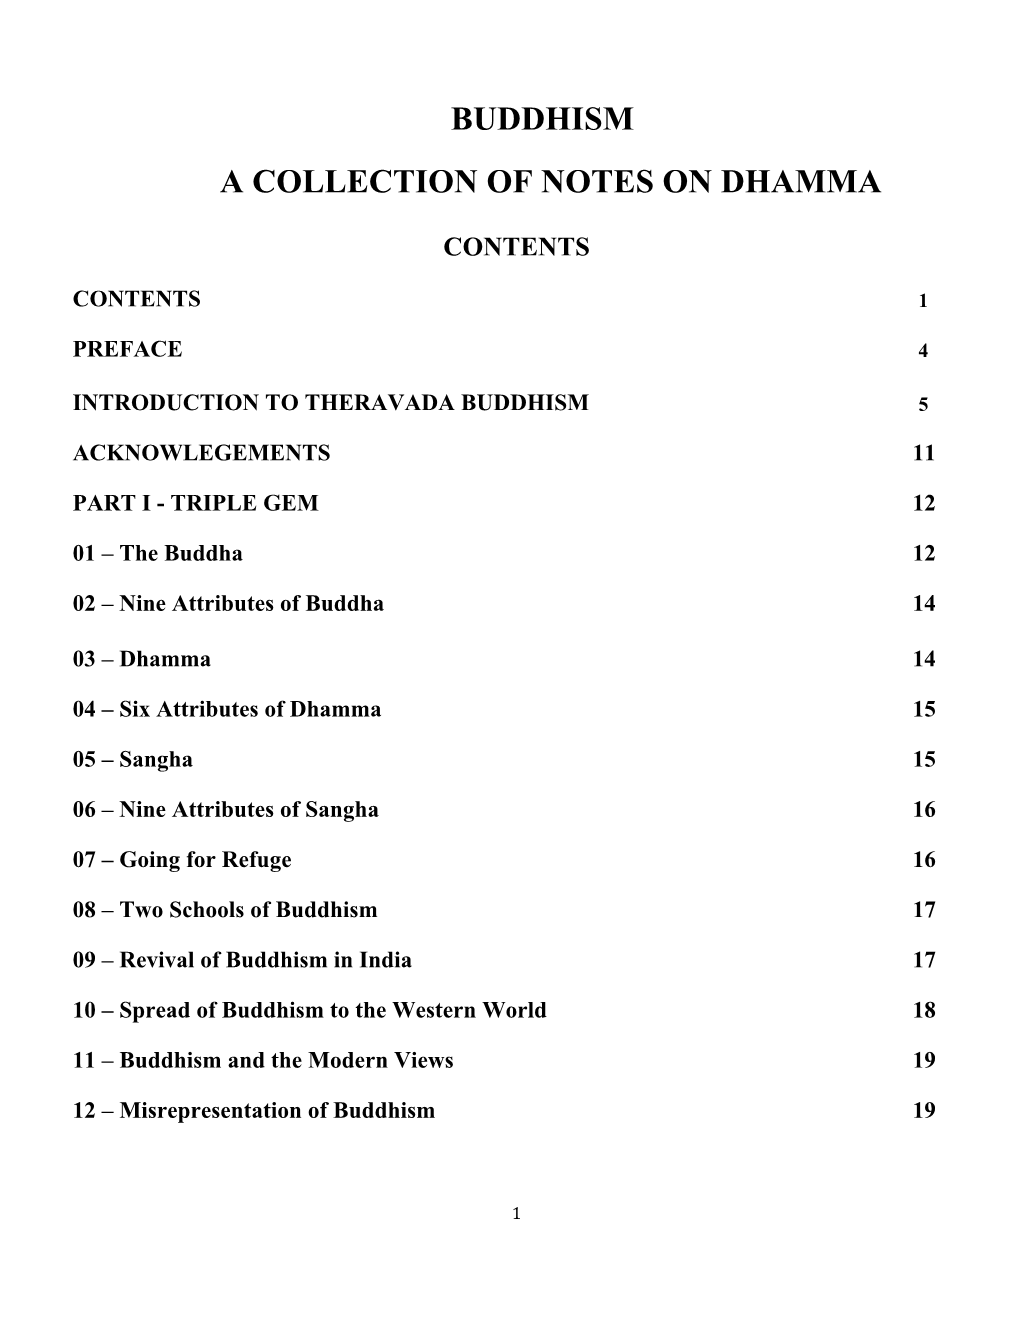 Buddhism a Collection of Notes on Dhamma